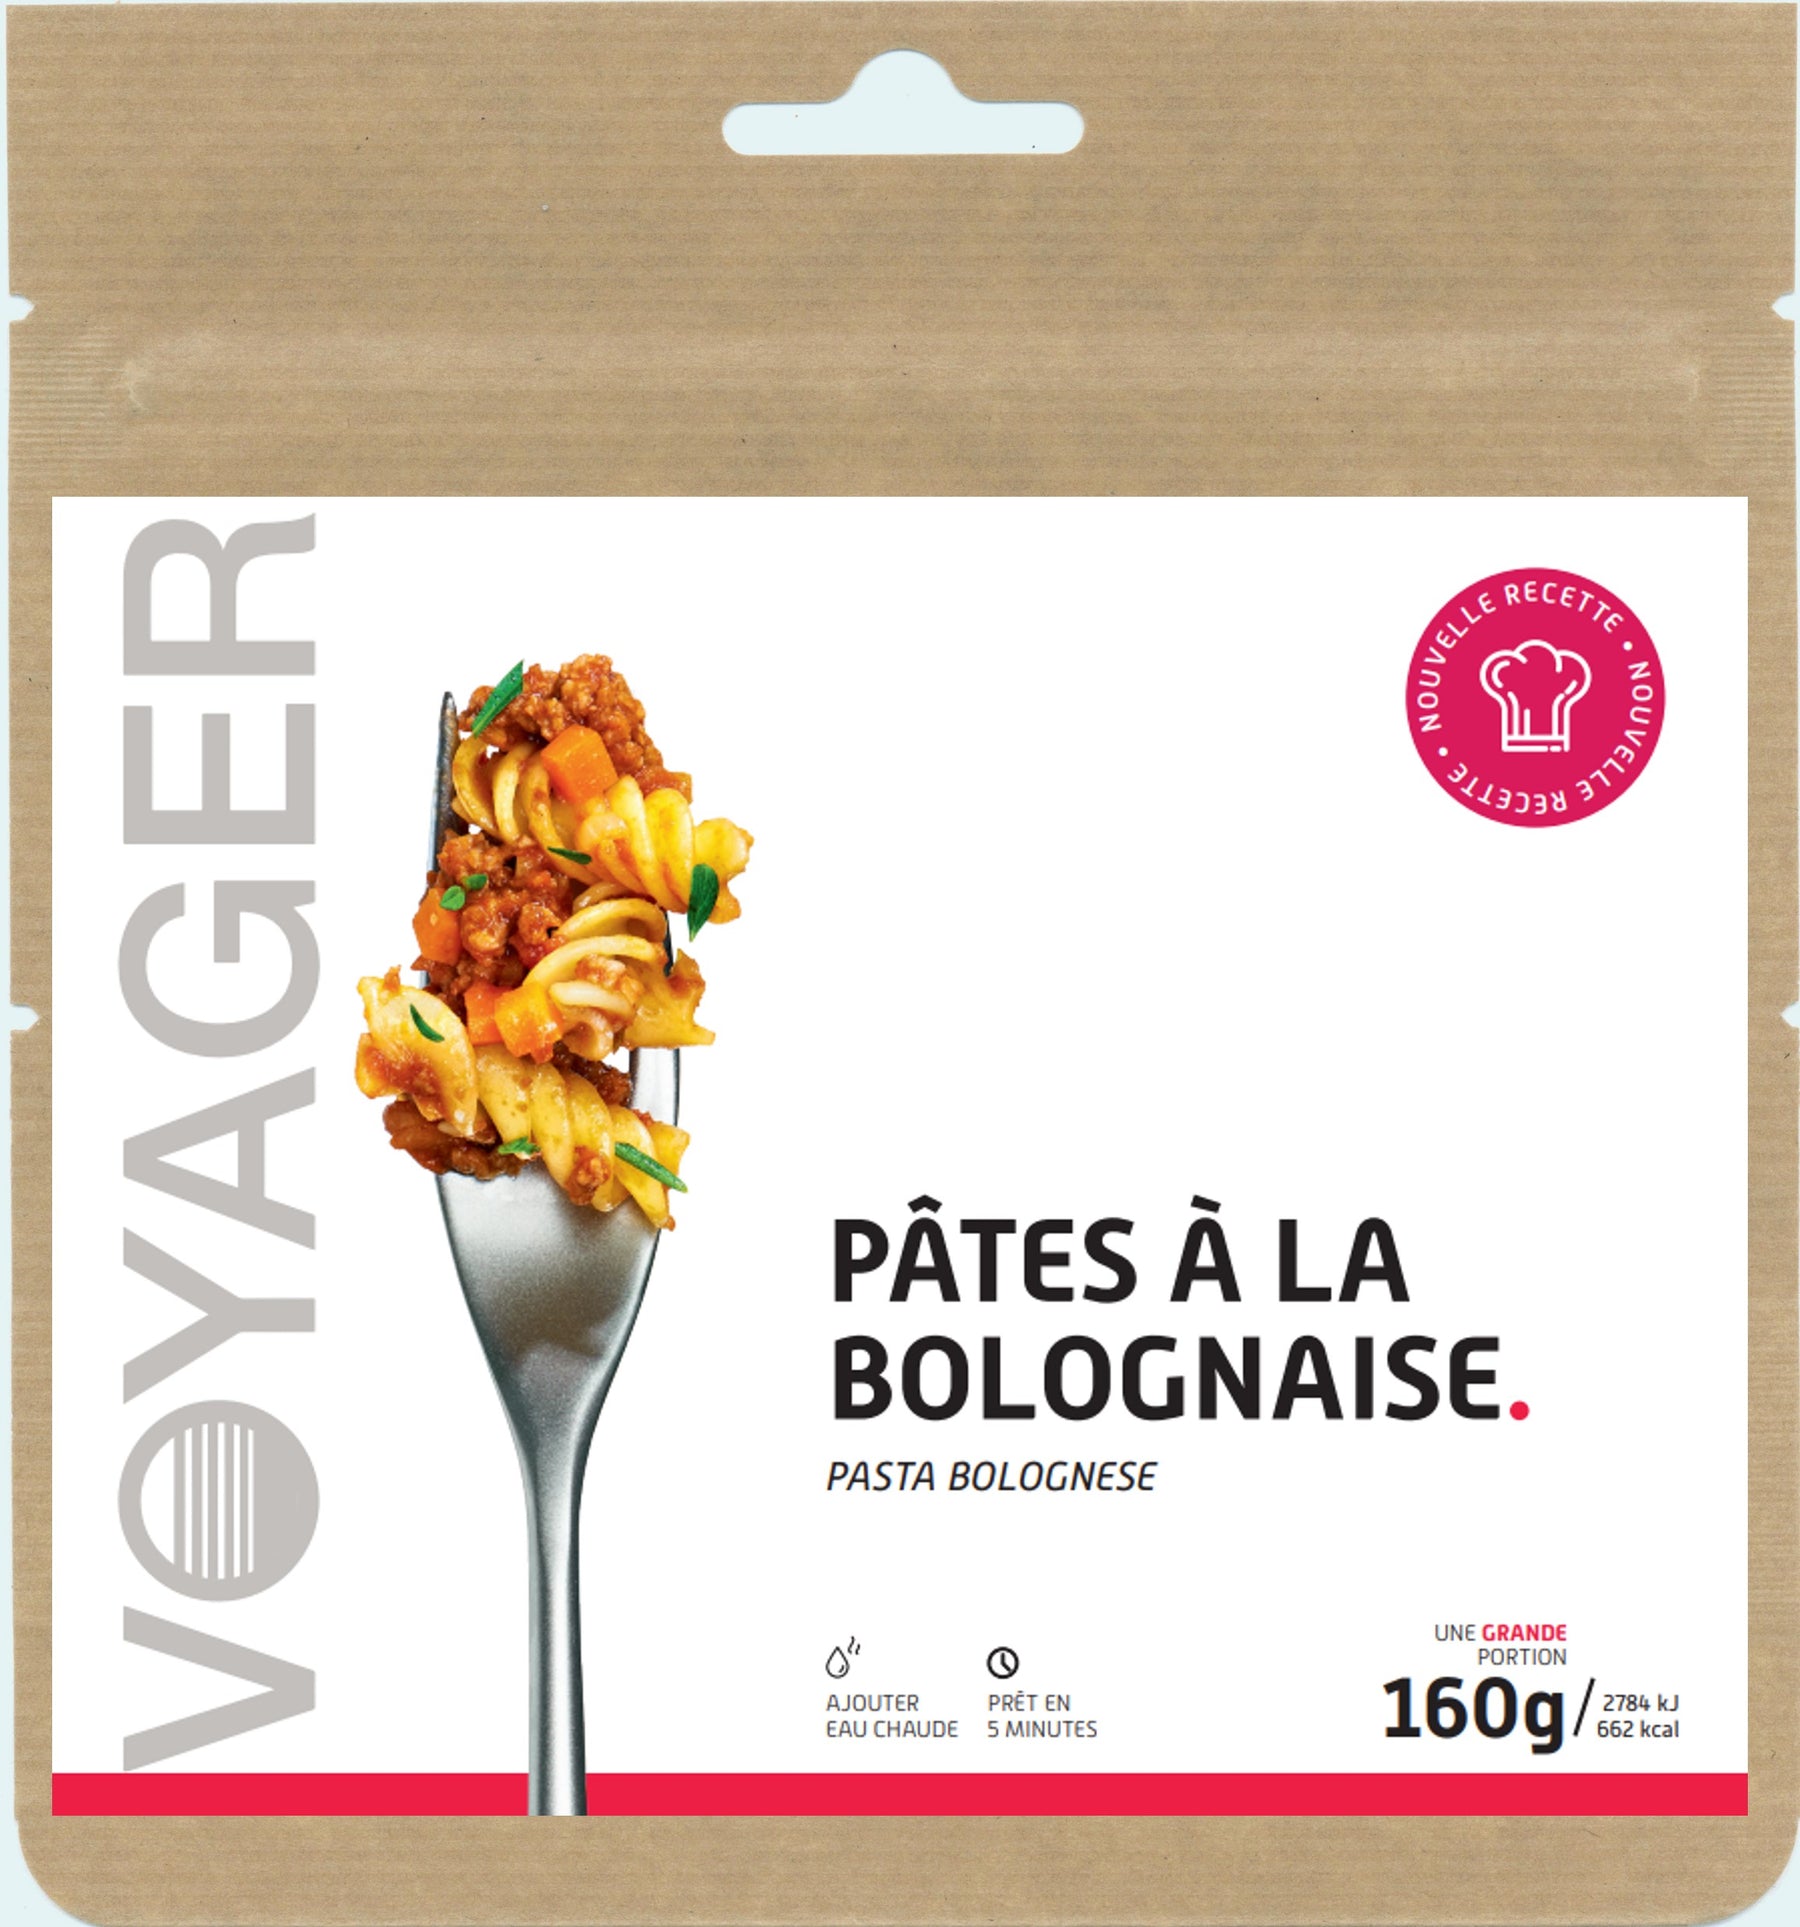 Freeze-dried bolognese pasta - 160g - 662 kcal